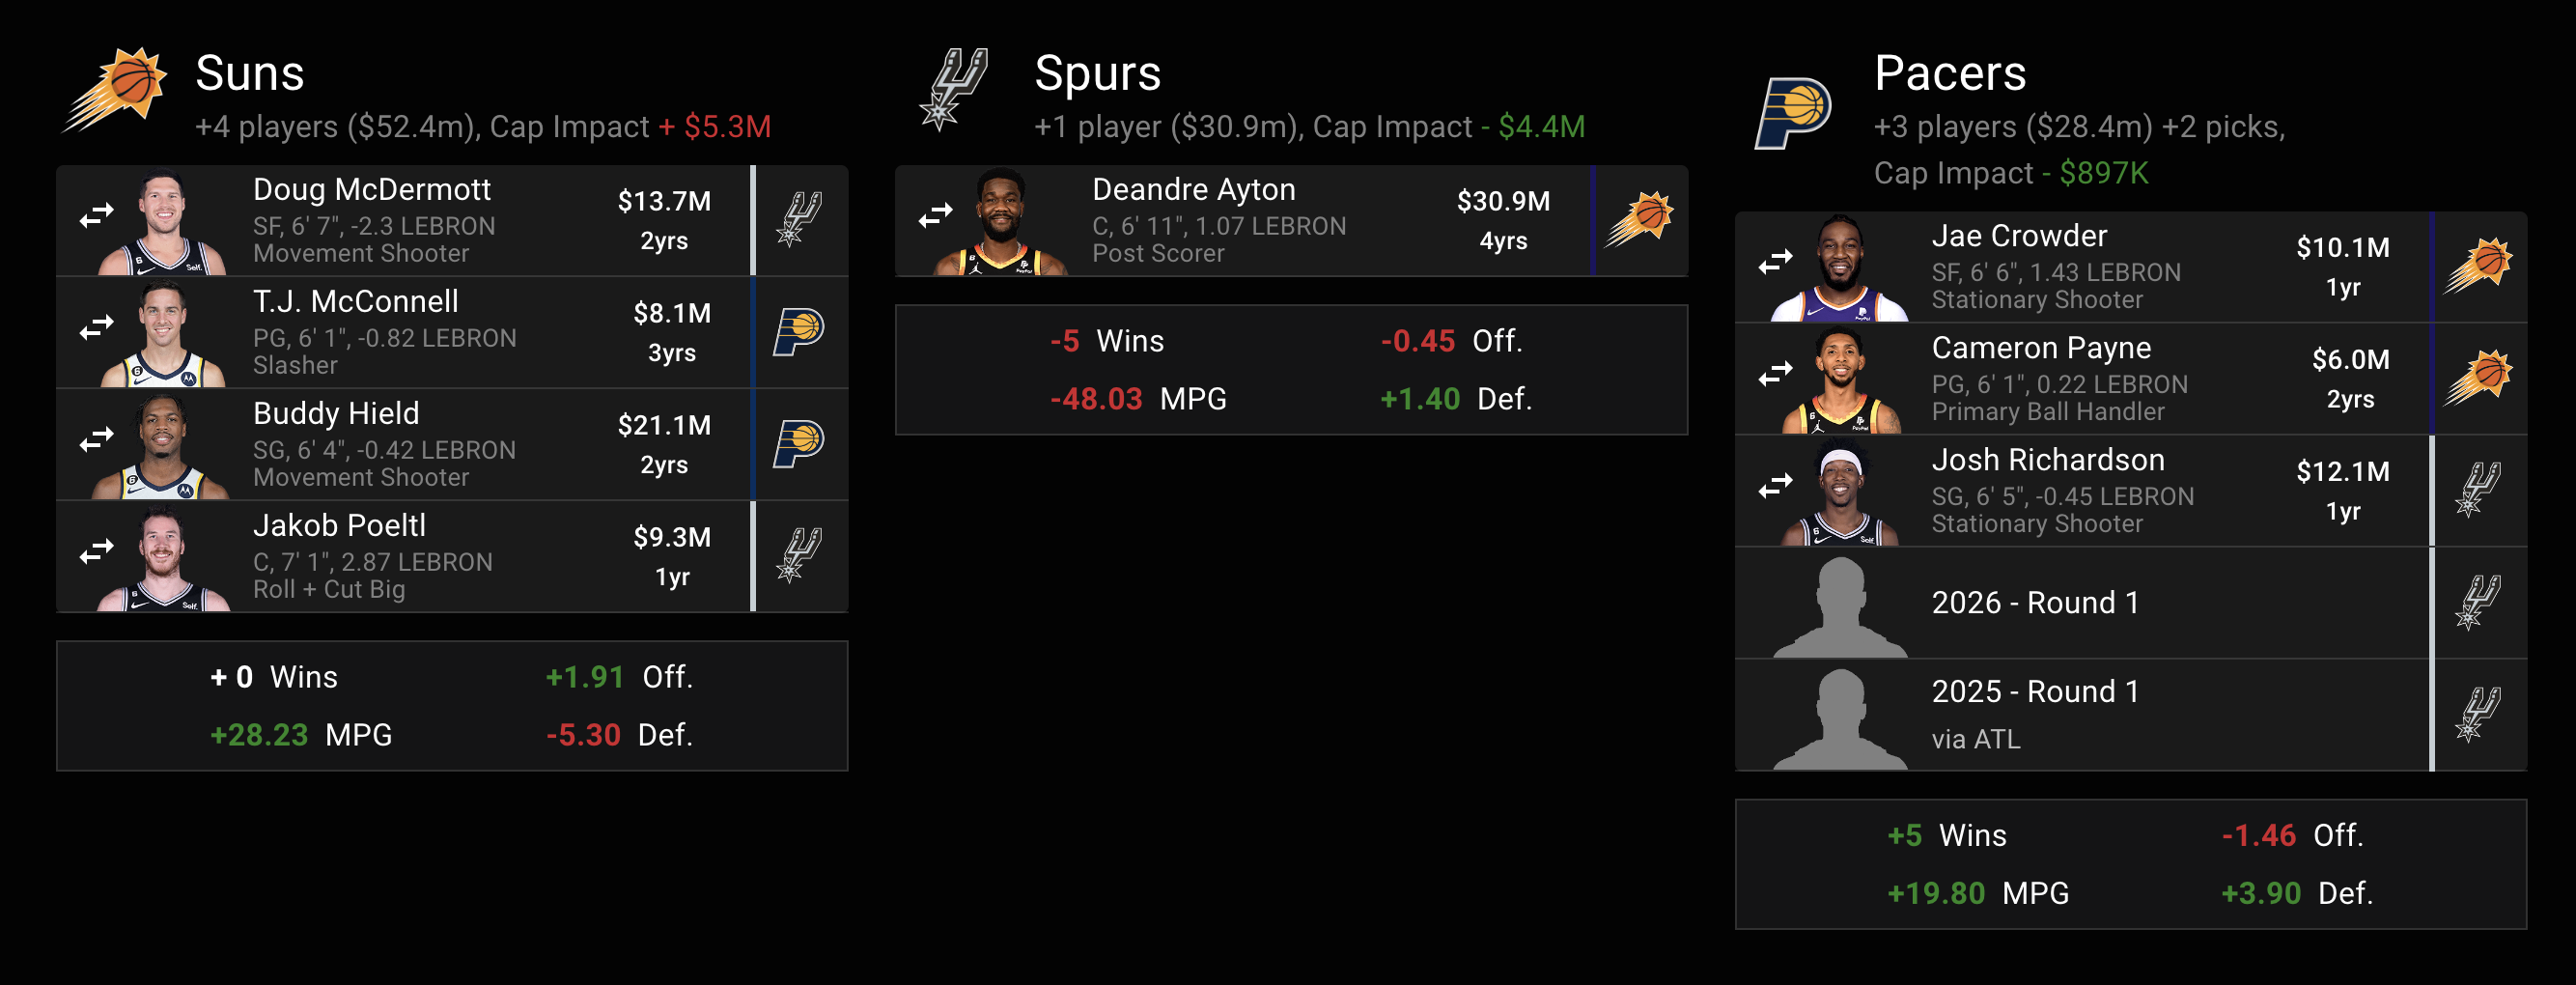 Phoenix suns make a 3-team trade with Spurs and Pacers